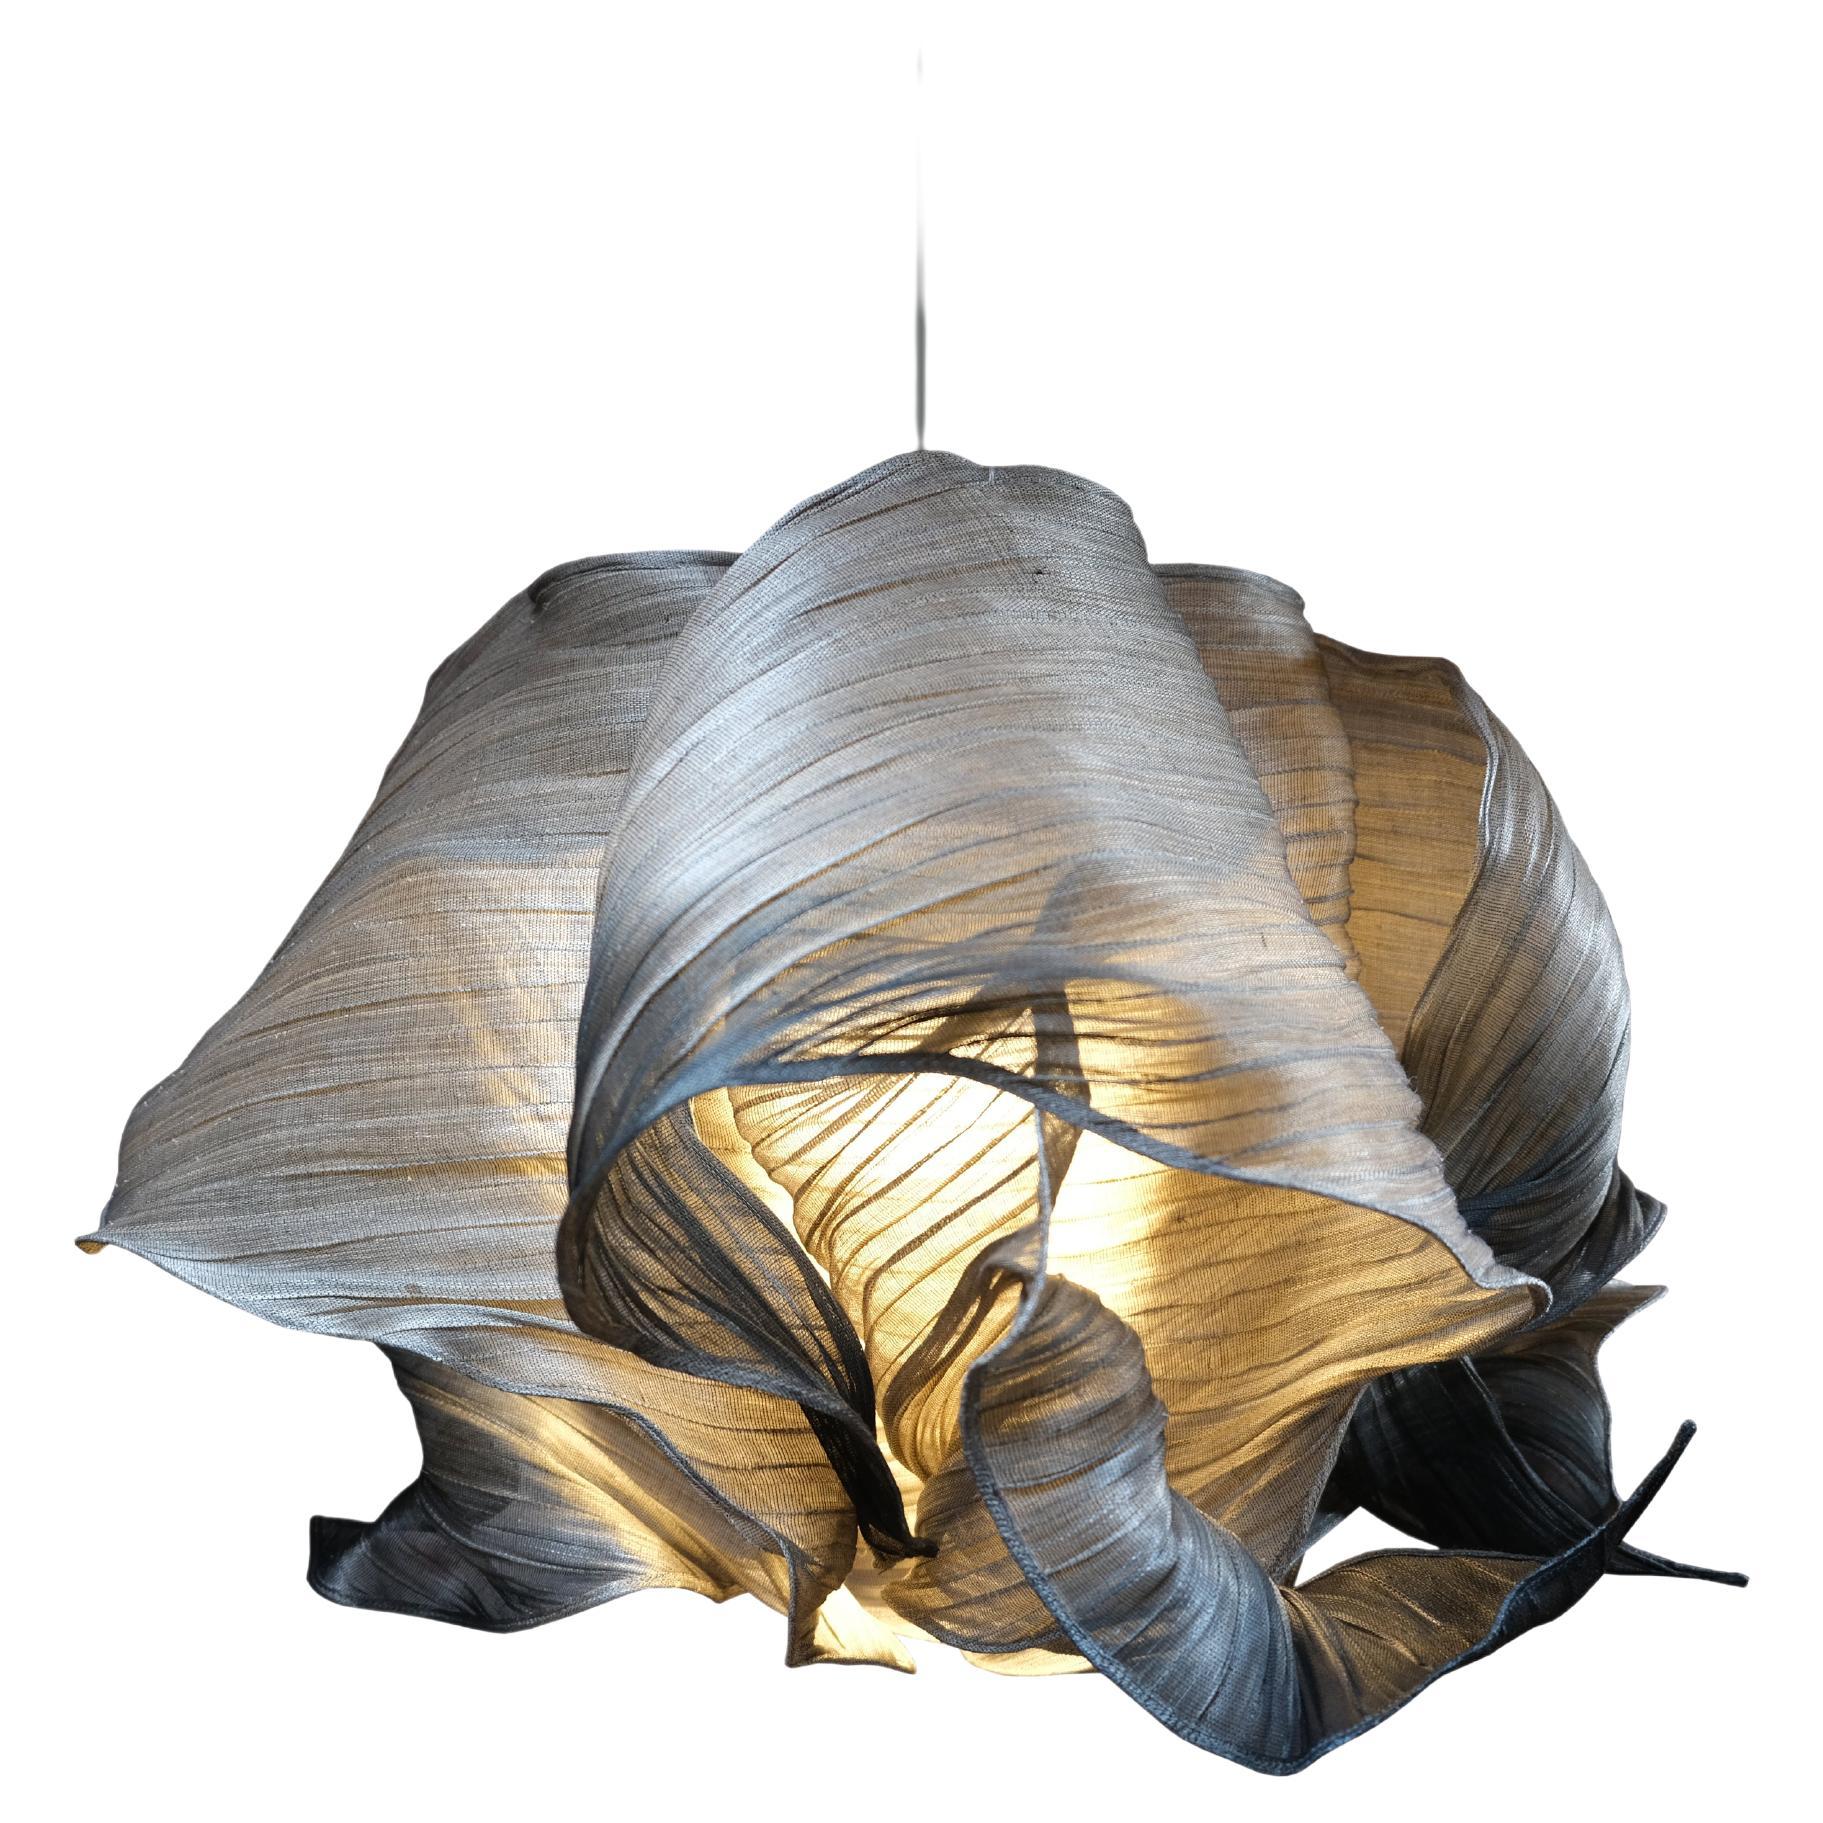 Handpainted Sculptural Fabric LED Chandelier from Mirei Monticelli, Nebula 60cm